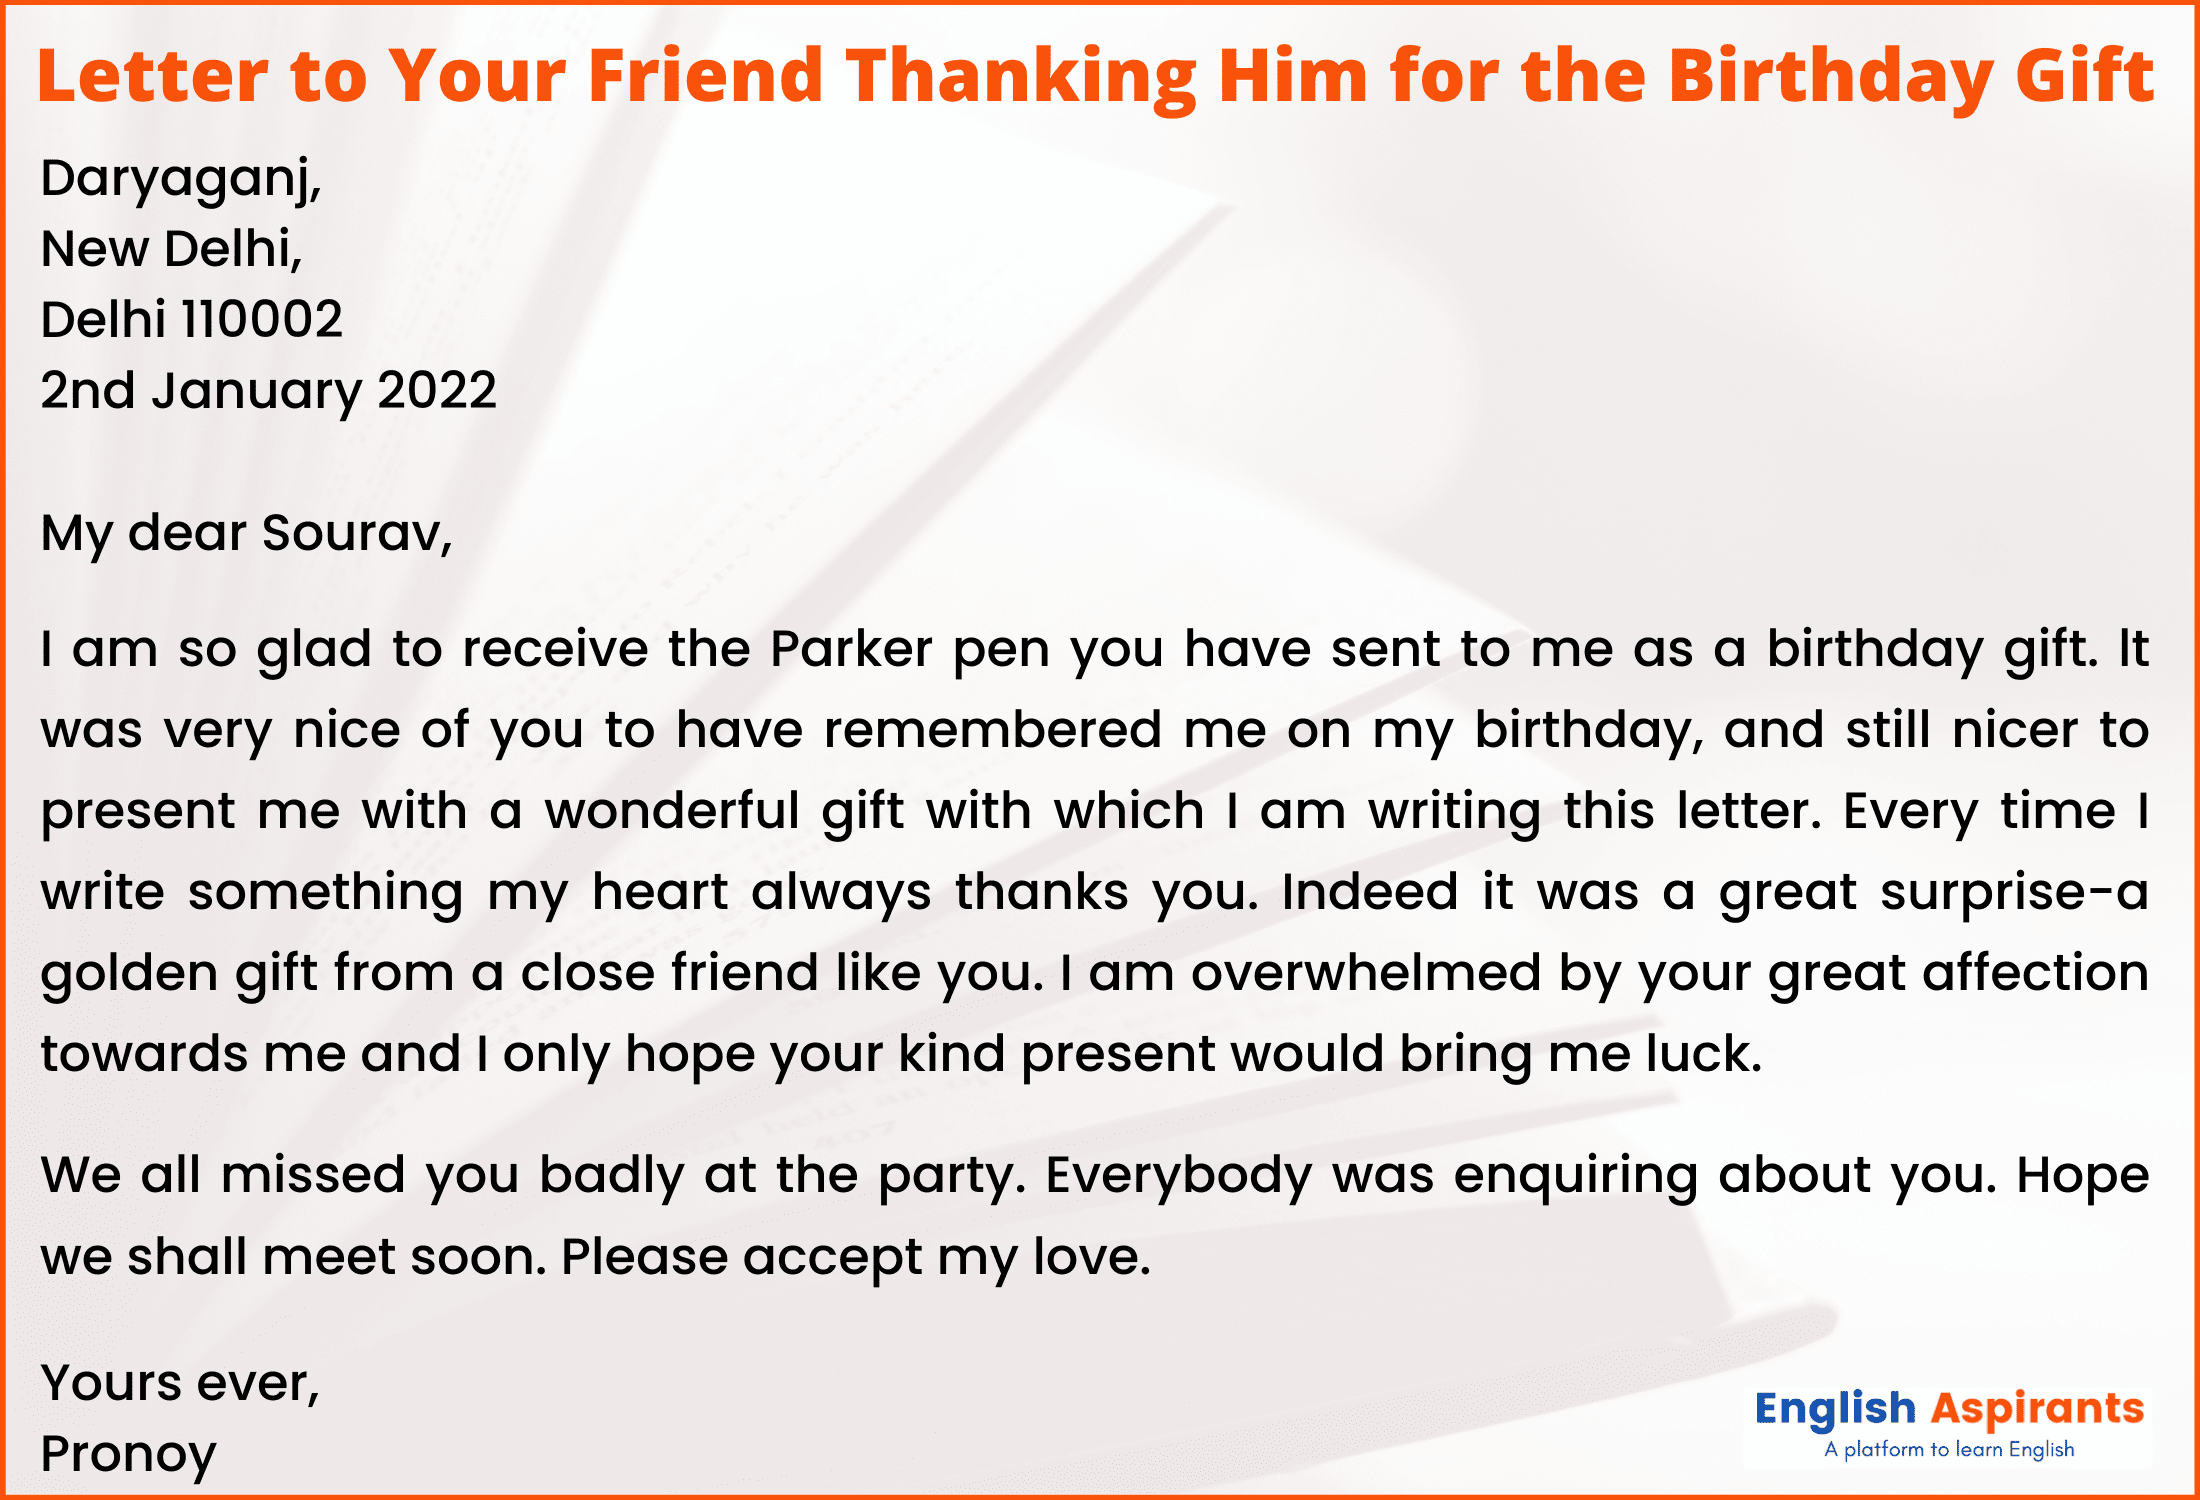 Write a Letter to Your Friend Thanking Him for the Birthday Gift 